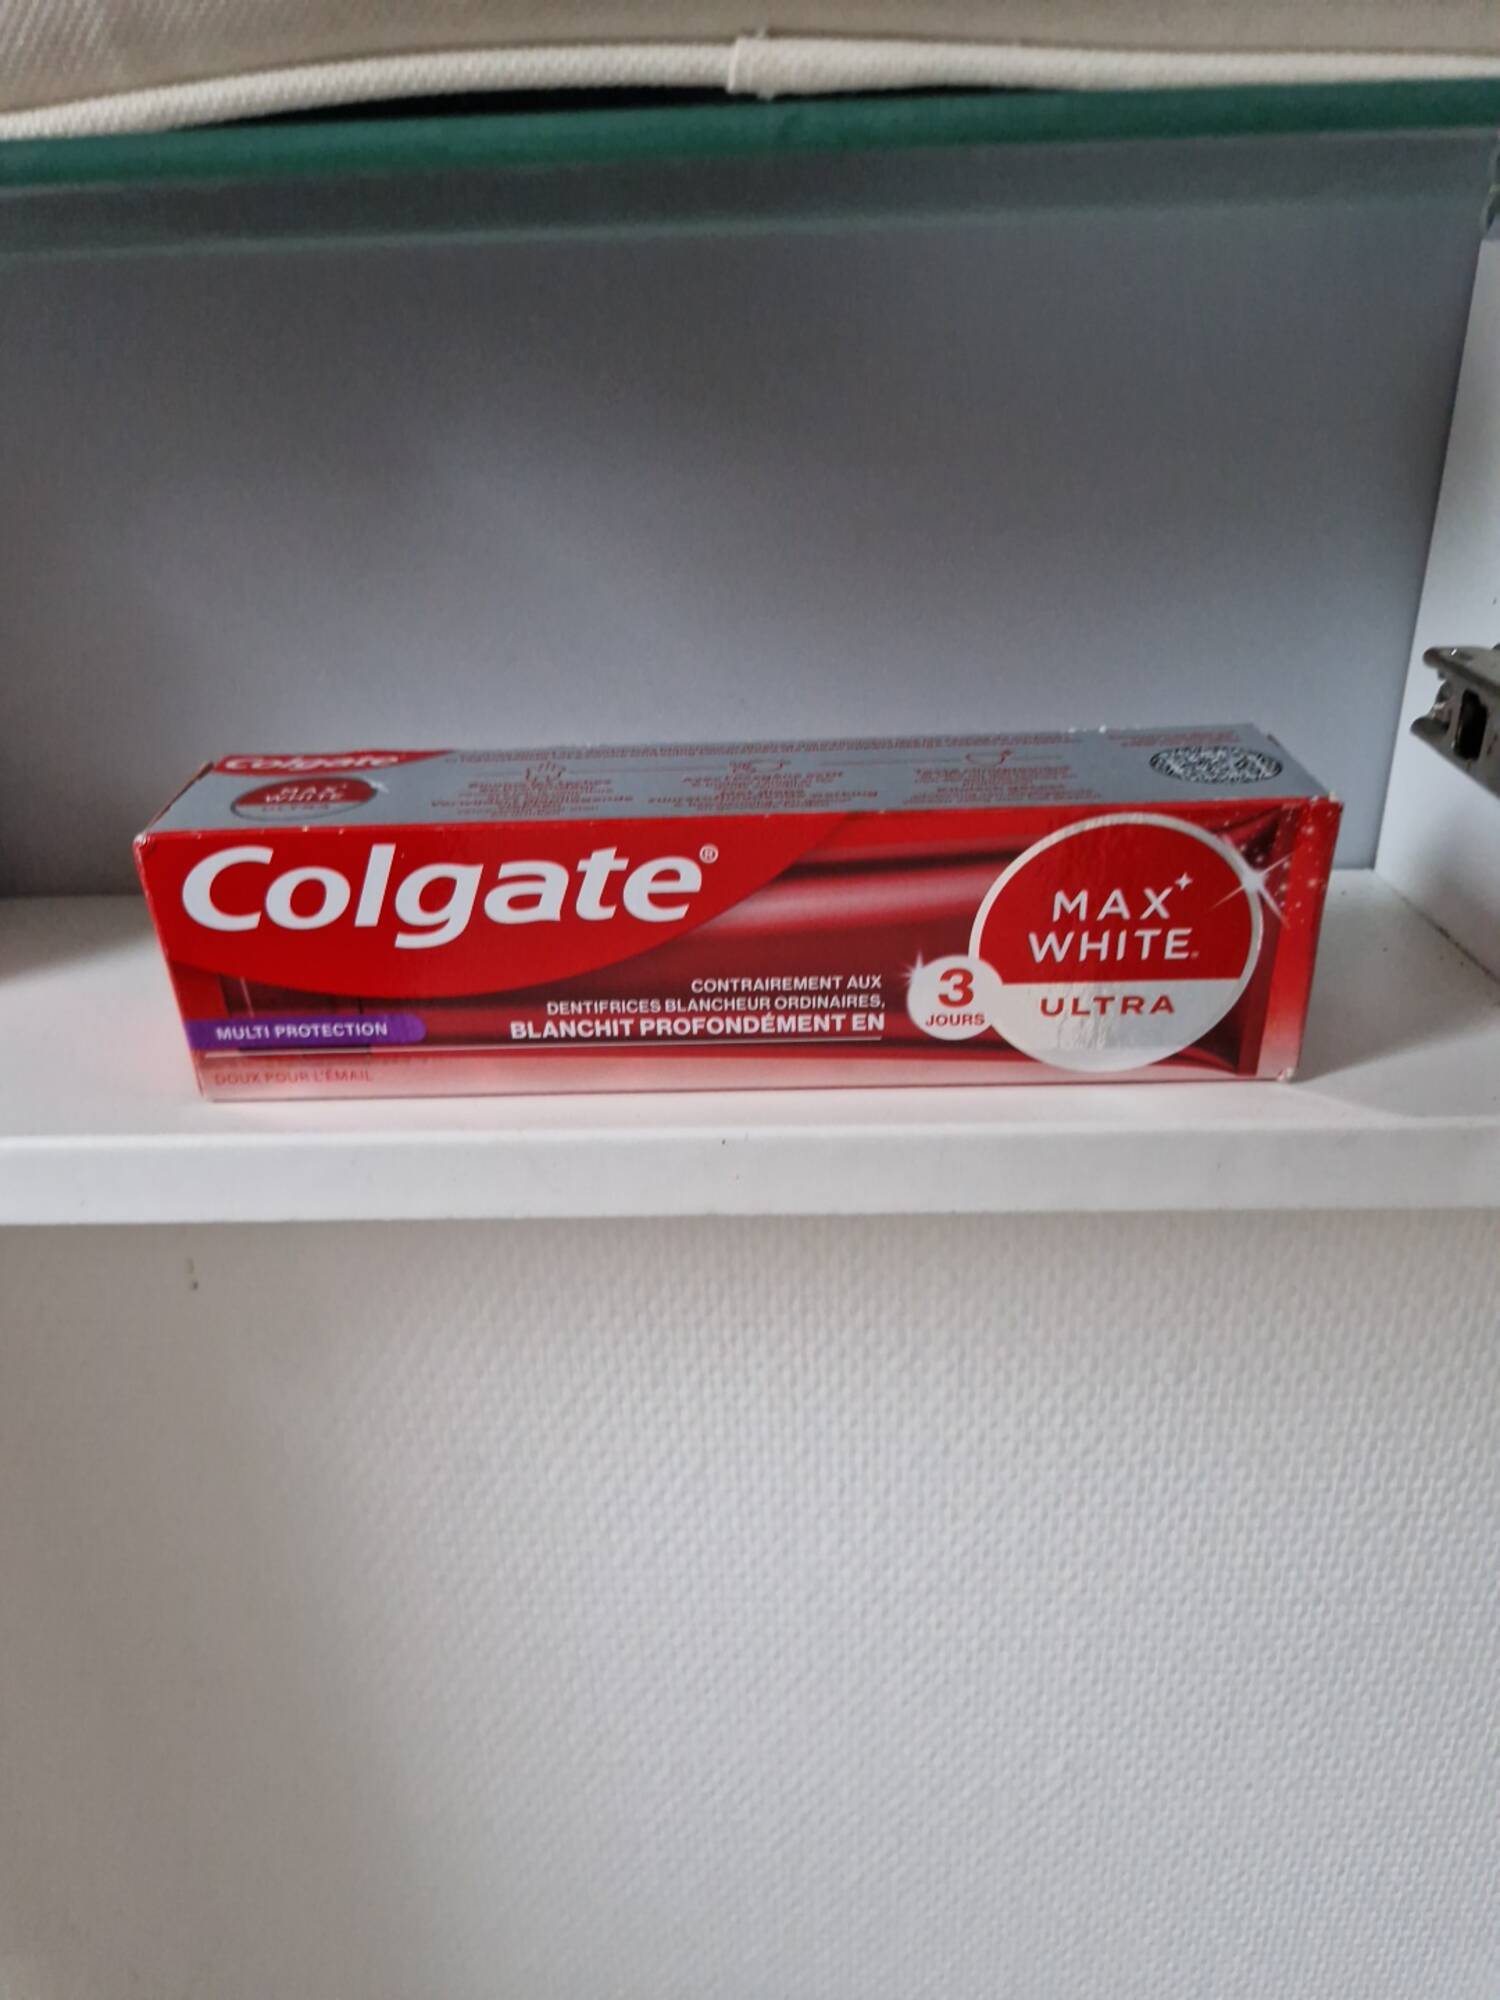 COLGATE - Max white Ultra - Dentifrices blancheur ordinaires